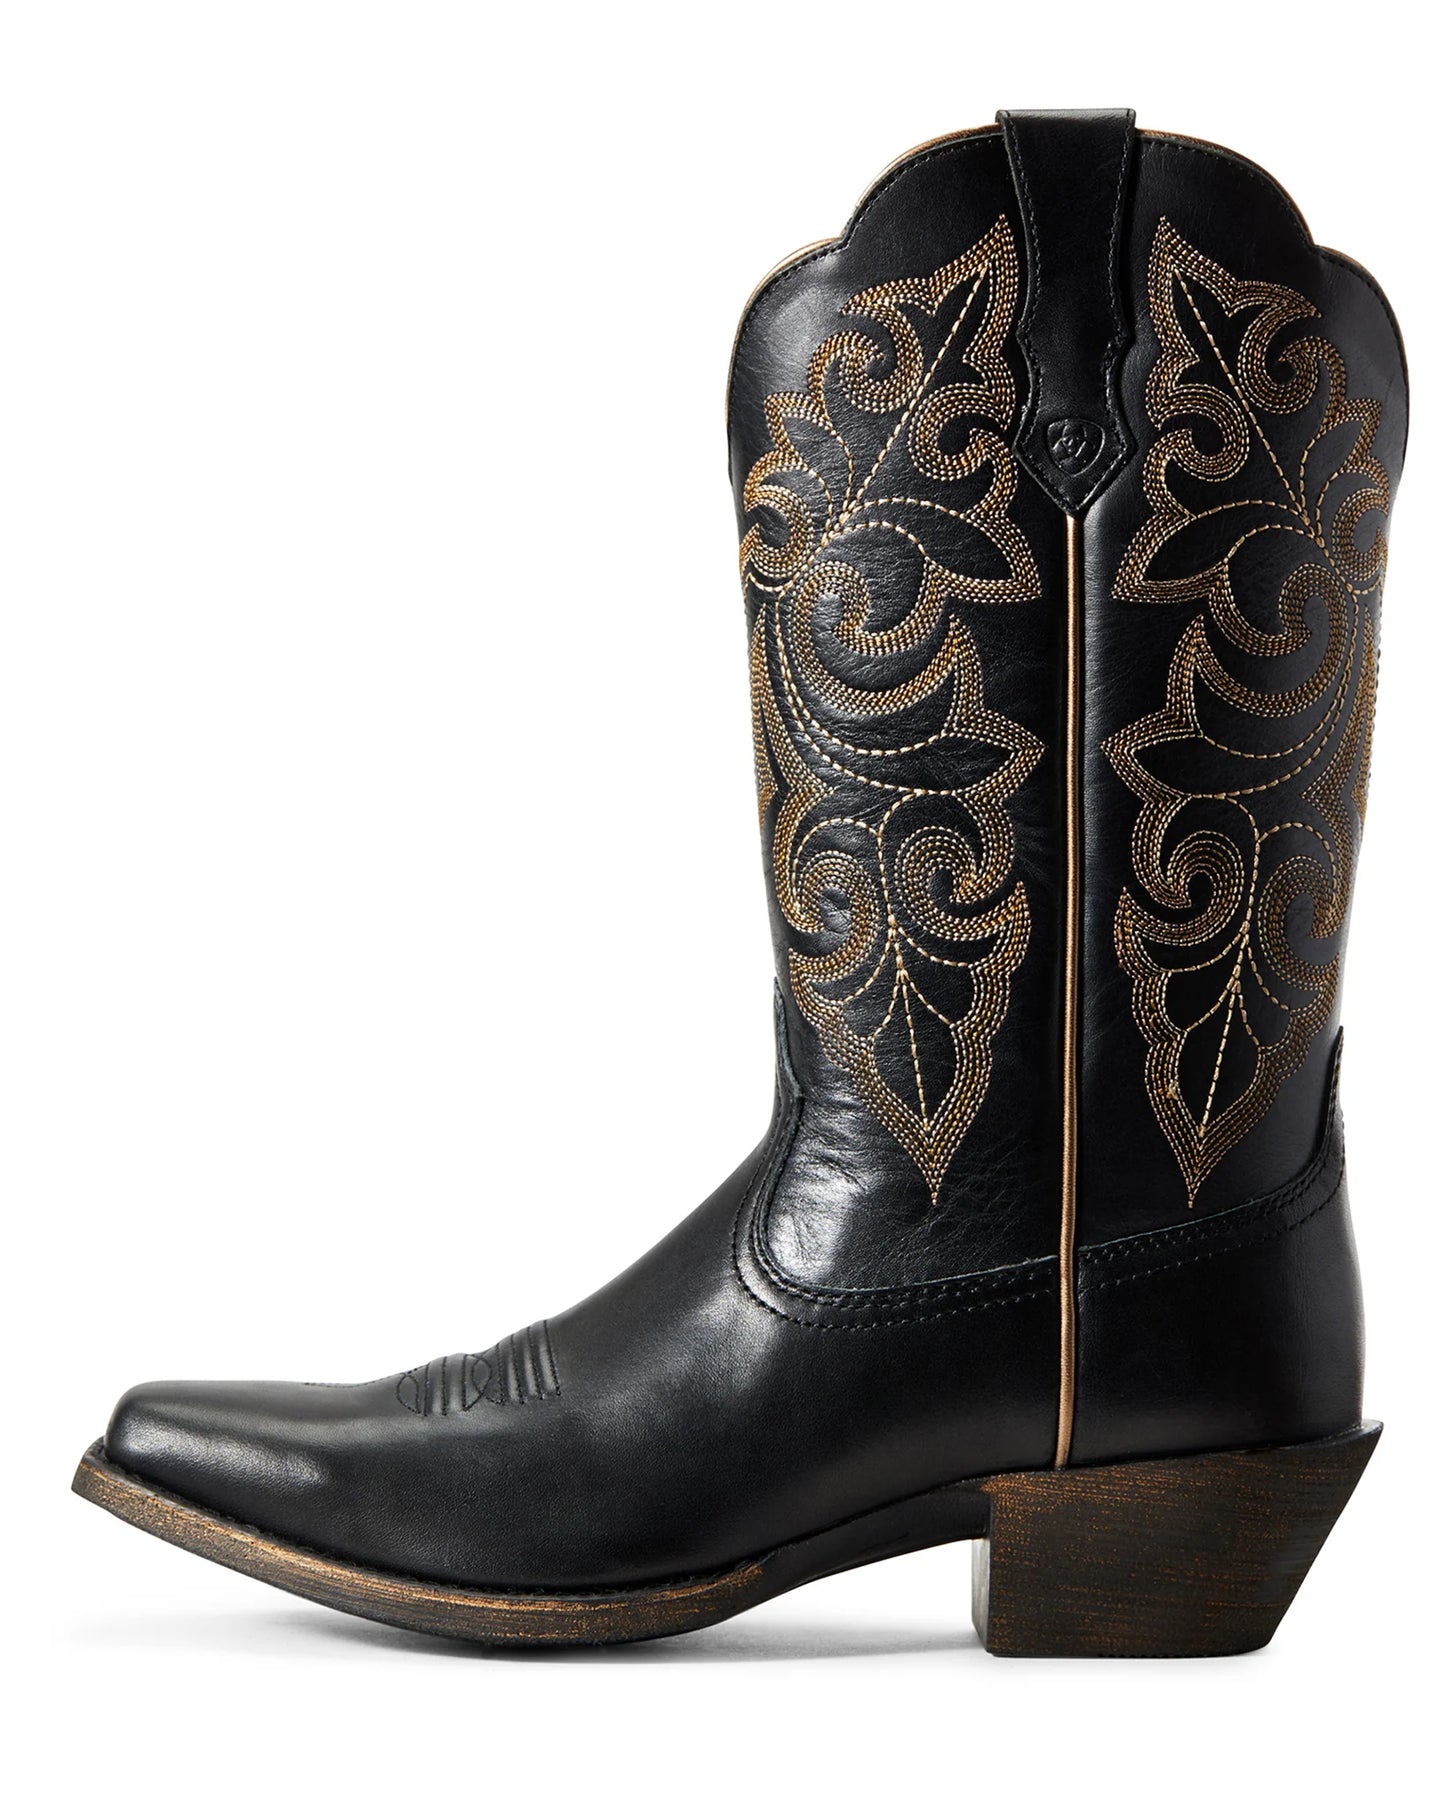 Ariat® Women's Black Round Up Western Square Toe Cowboy Boots